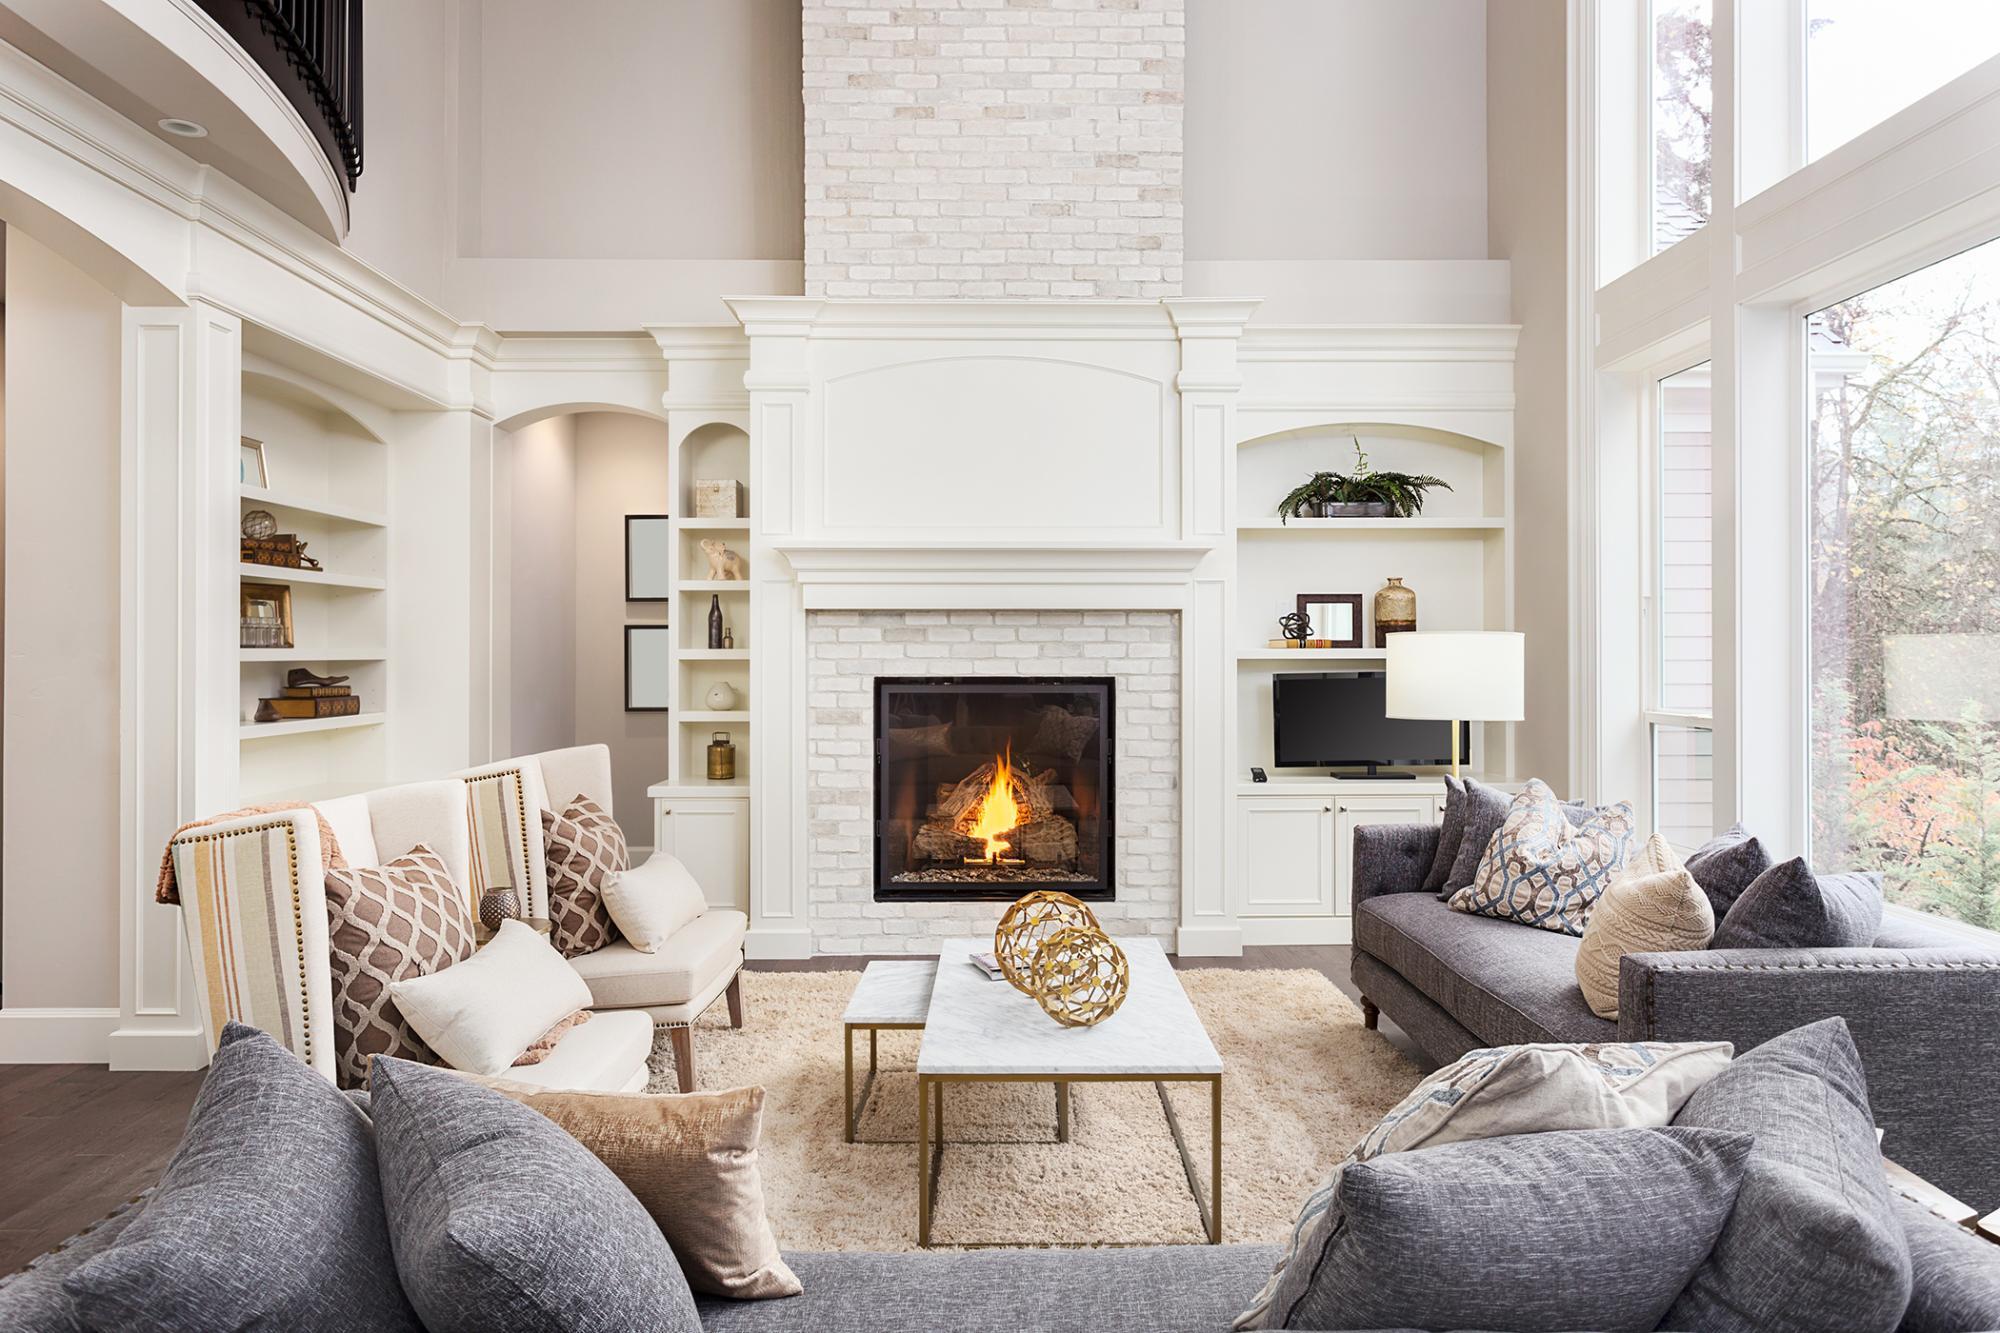 Cozy living room with comfortable couches and chairs and a fireplace in the back